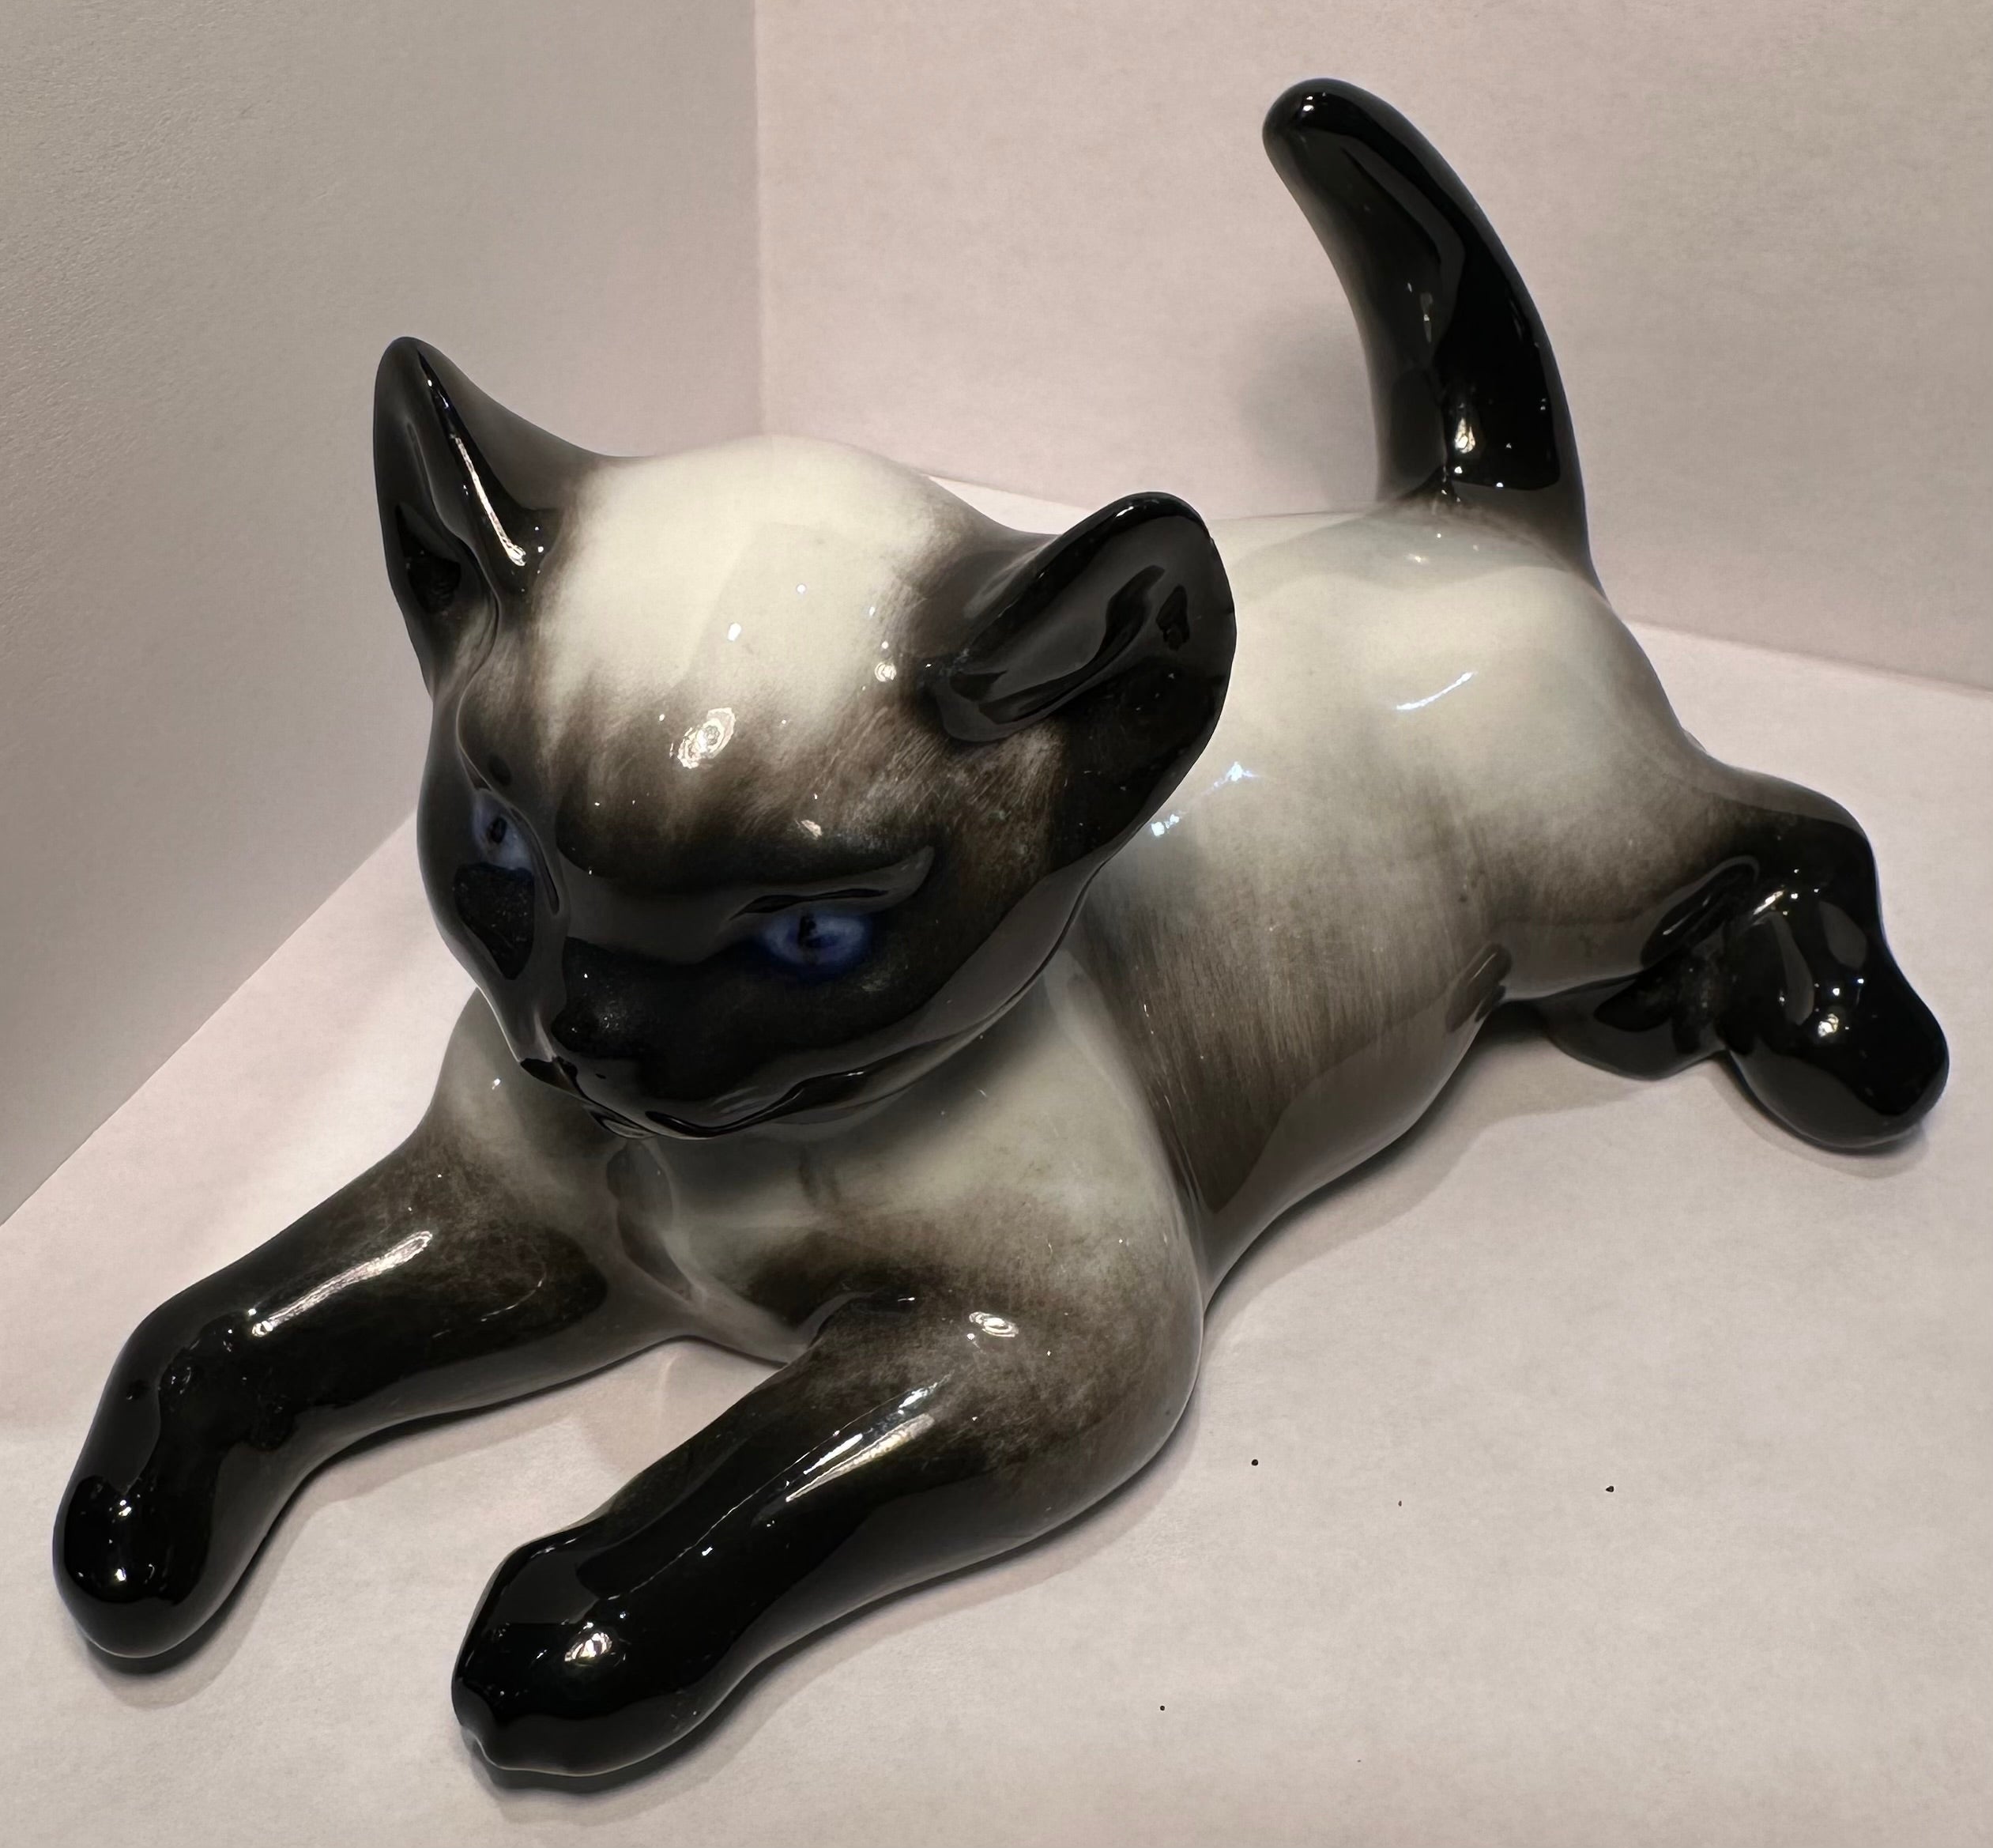 
Finest quality, vintage retired, handmade and hand painted in Germany, Rosenthal porcelain Siamese kitten or cat figurine designed by well known deceased German artist, Fritz Heidenreich (1895-1966). The cat has been masterfully handmade and hand